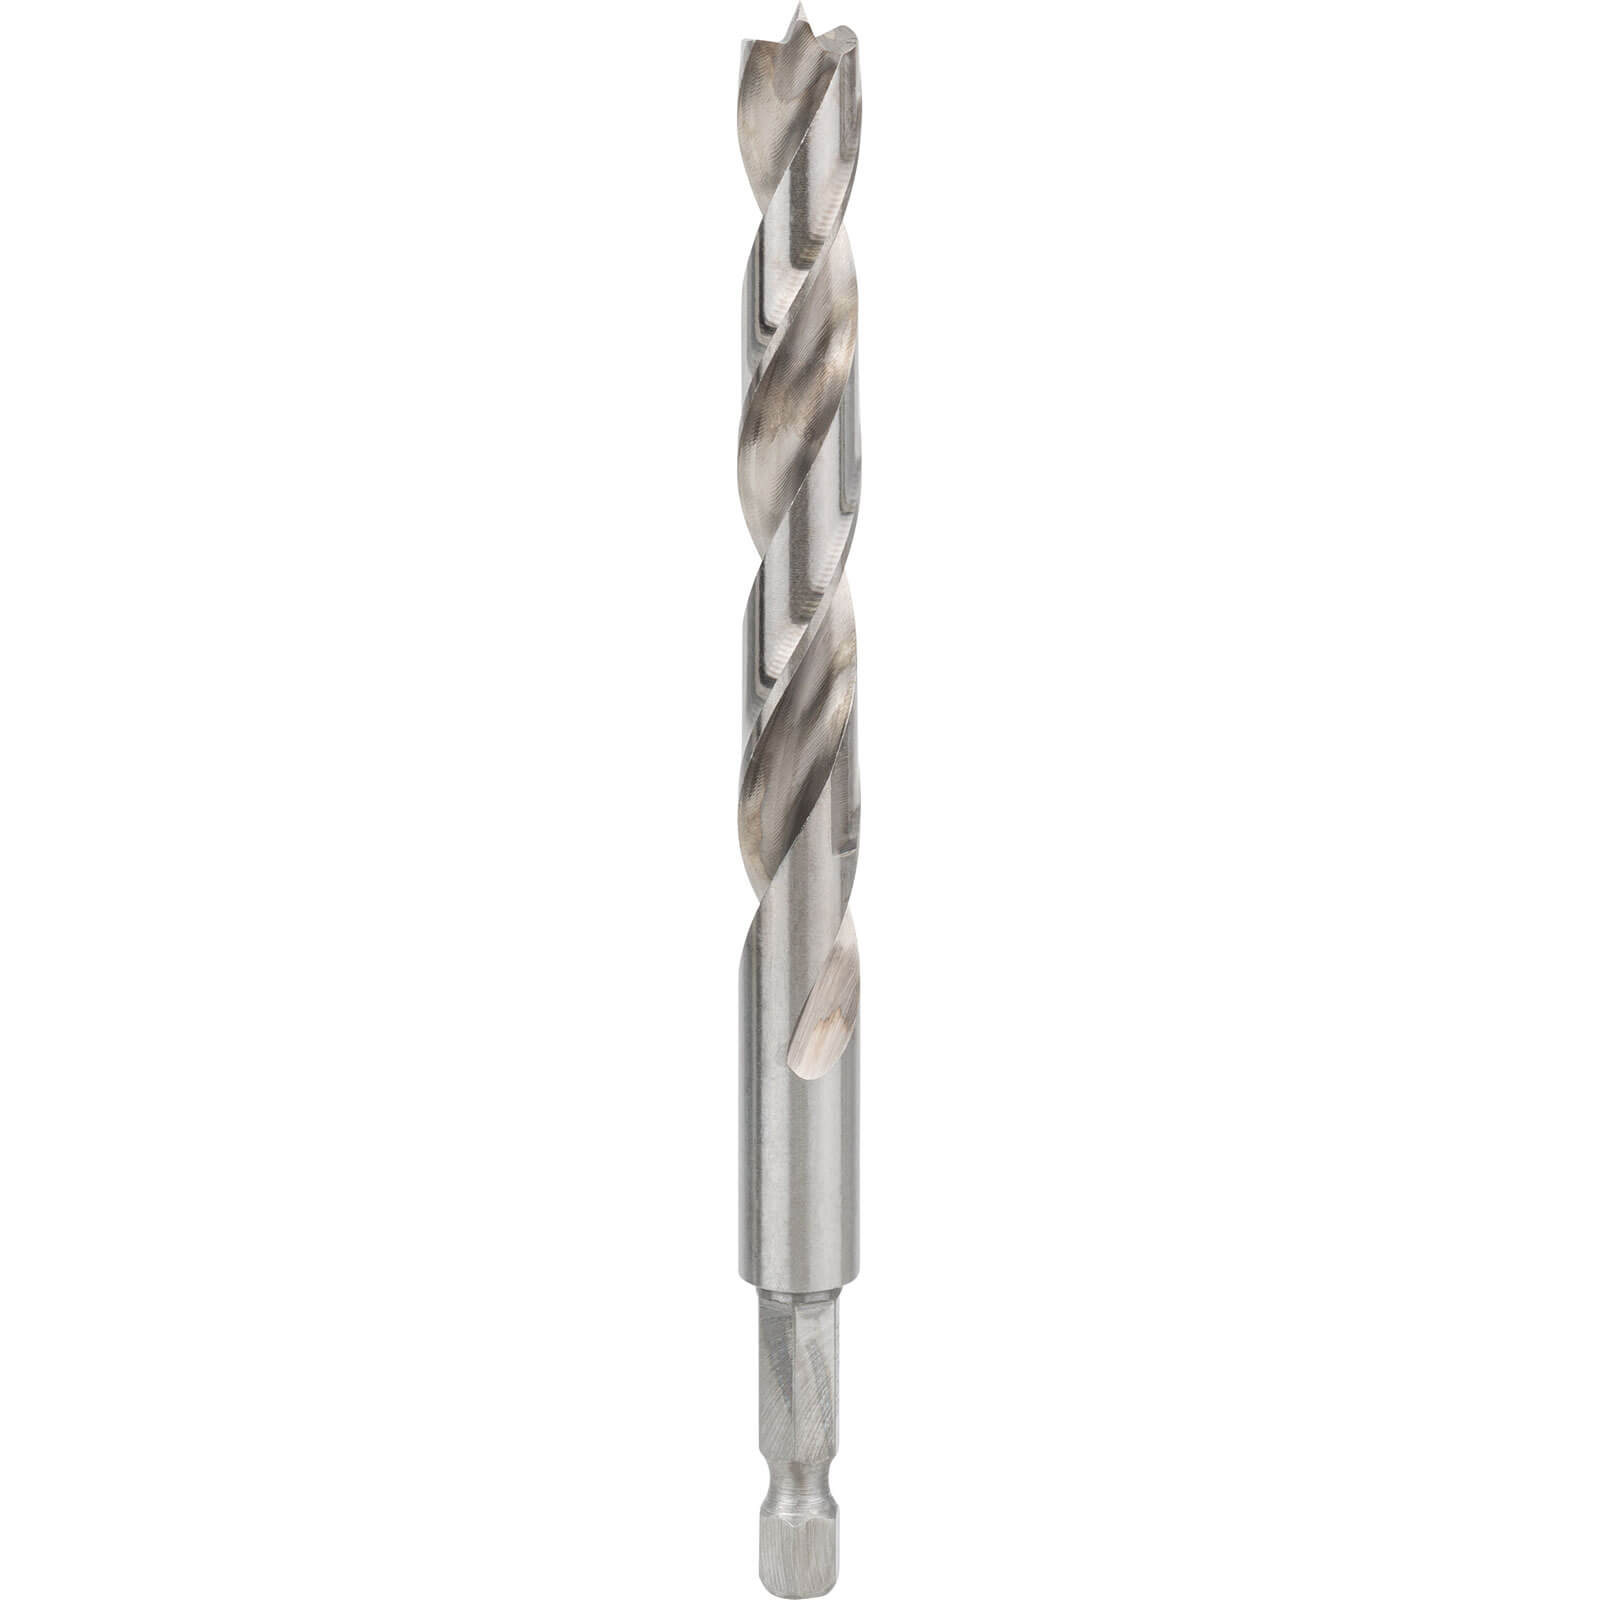 Image of Bosch Hex Shank Drill Bit for Wood 10mm